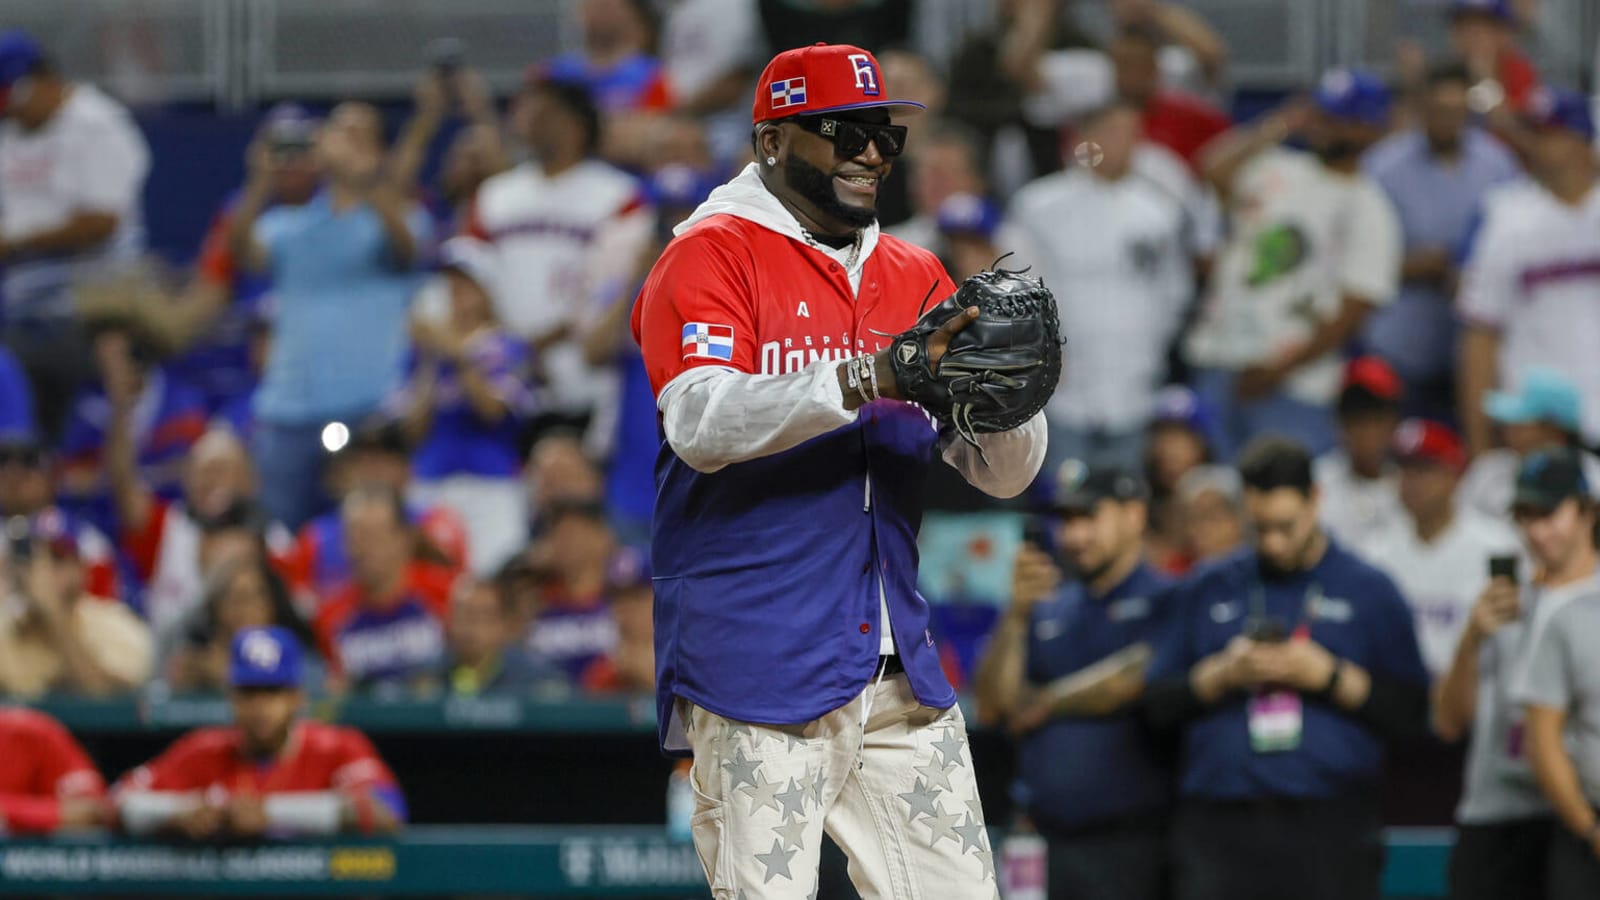 David Ortiz makes excuse for why Dominican Republic lost in WBC